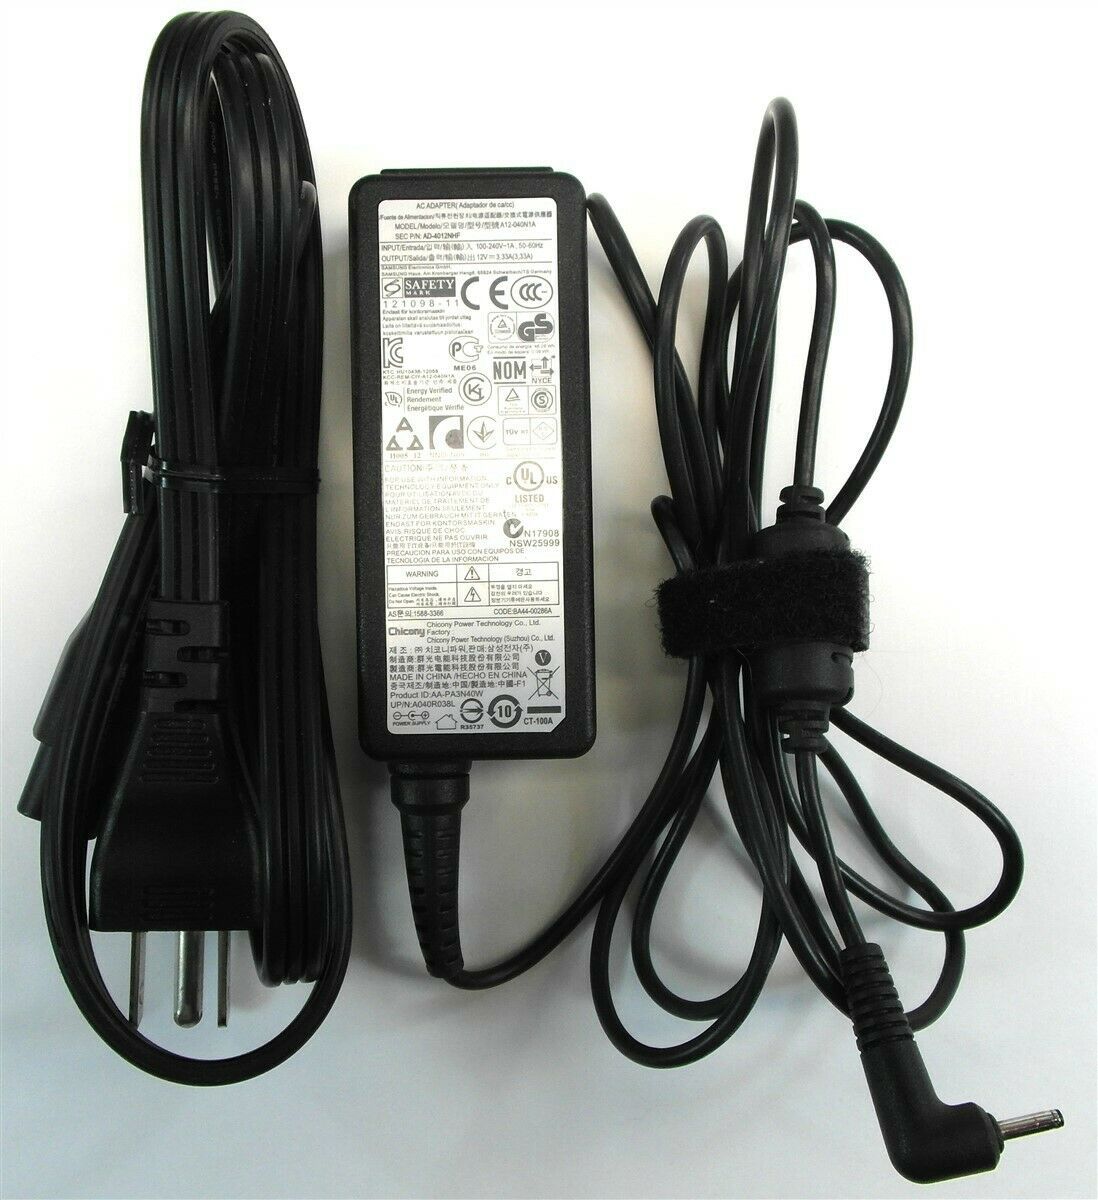 Chicony Samsung Laptop Charger AC Adapter power Supply A12-040N1A AD-4012NHF 40W - $12.99